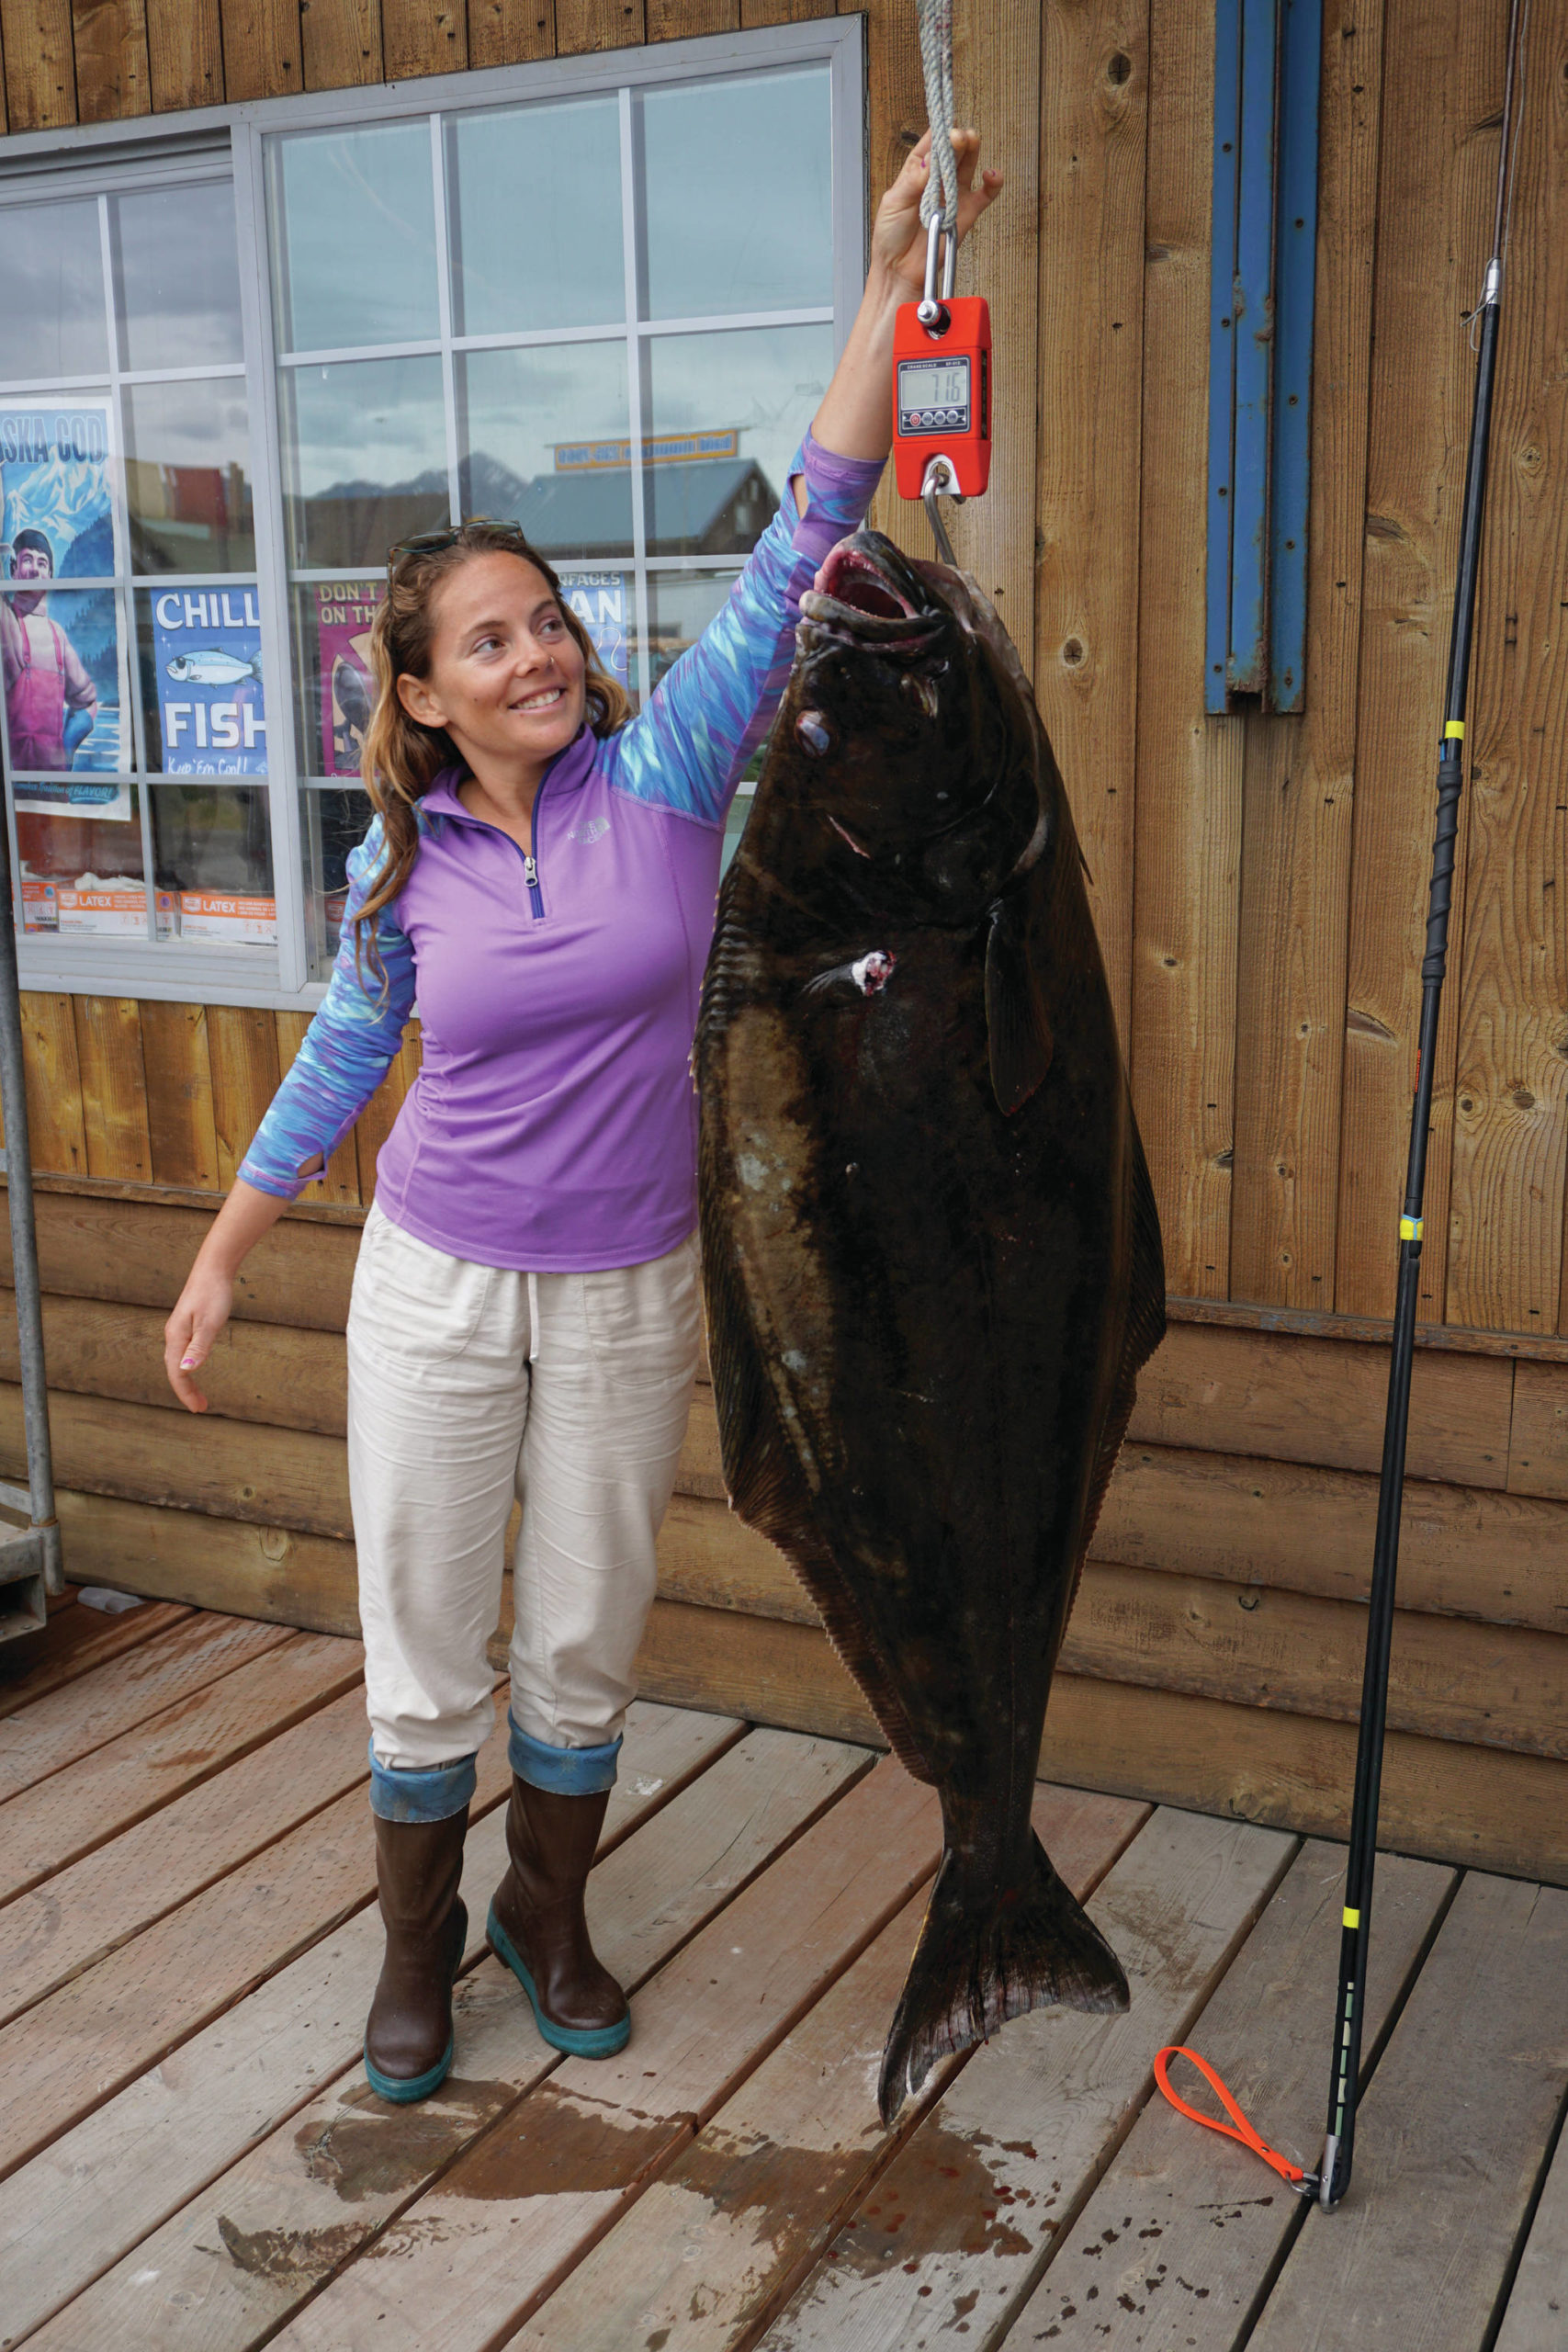 Lisa Stengel of Fort Lauderdale, Florida, weighs a halibut on Monday, July 12, 2021, at Coal Point Seafoods in Homer, Alaska, that she caught with a pole spear while free diving in Kachemak Bay. If verified, the 71.4-pound halibut would be the International Underwater Spearfishing Association world record for a Pacific halibut caught by a woman using a pole spear. (Photo by Michael Armstrong/Homer News)